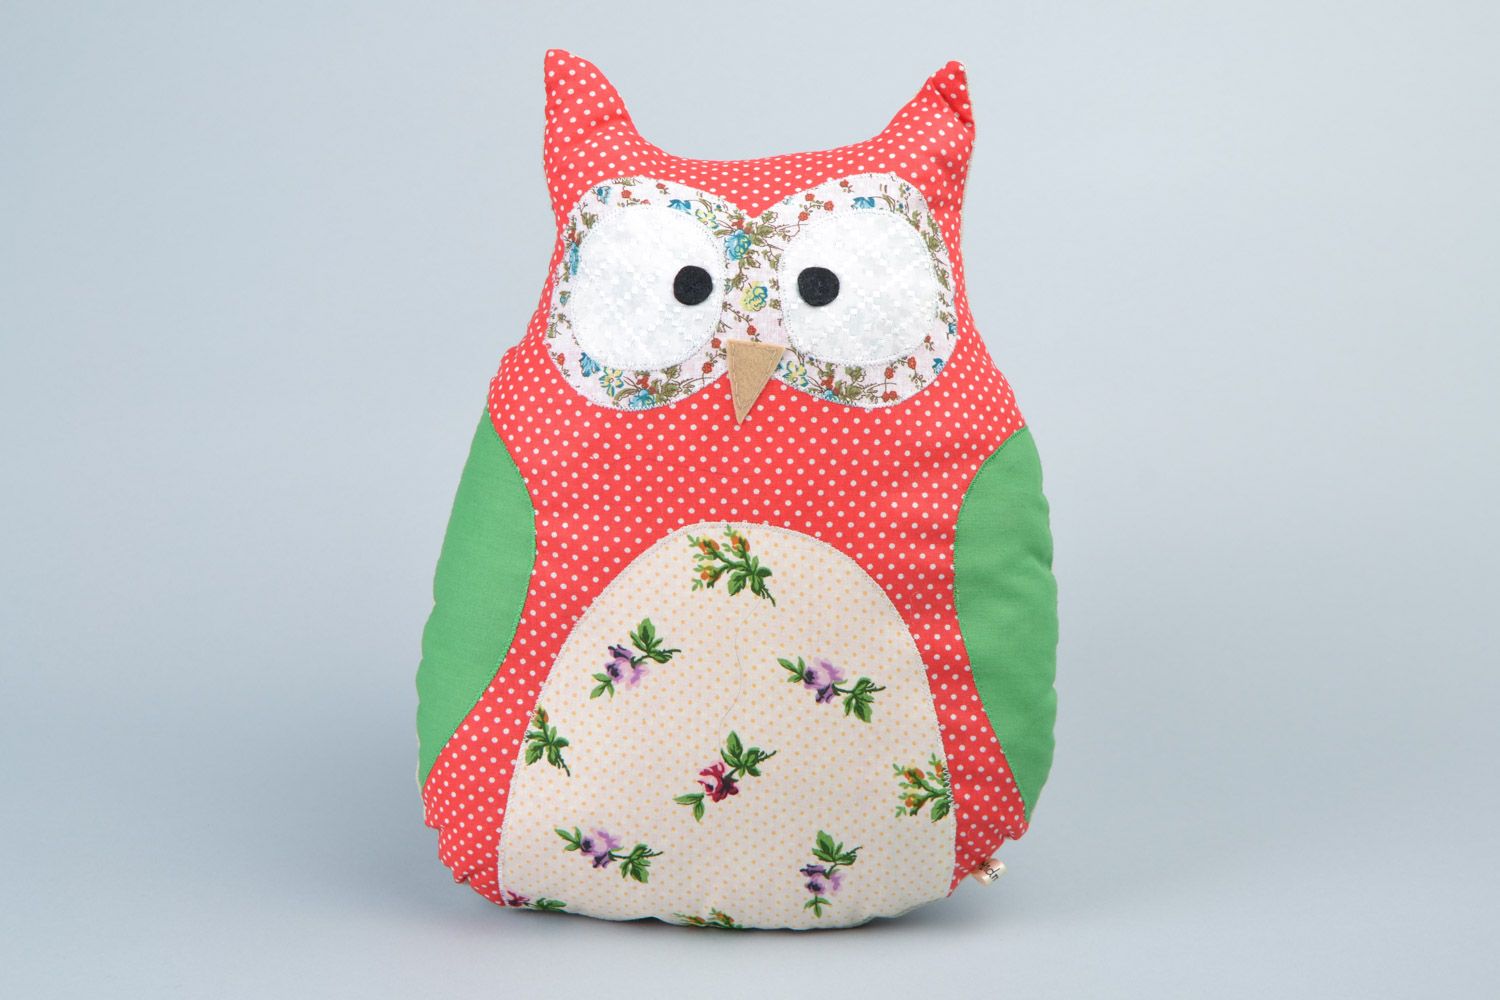 Handmade soft pillow pet sewn of cotton fabric in the shape of colorful owl photo 1